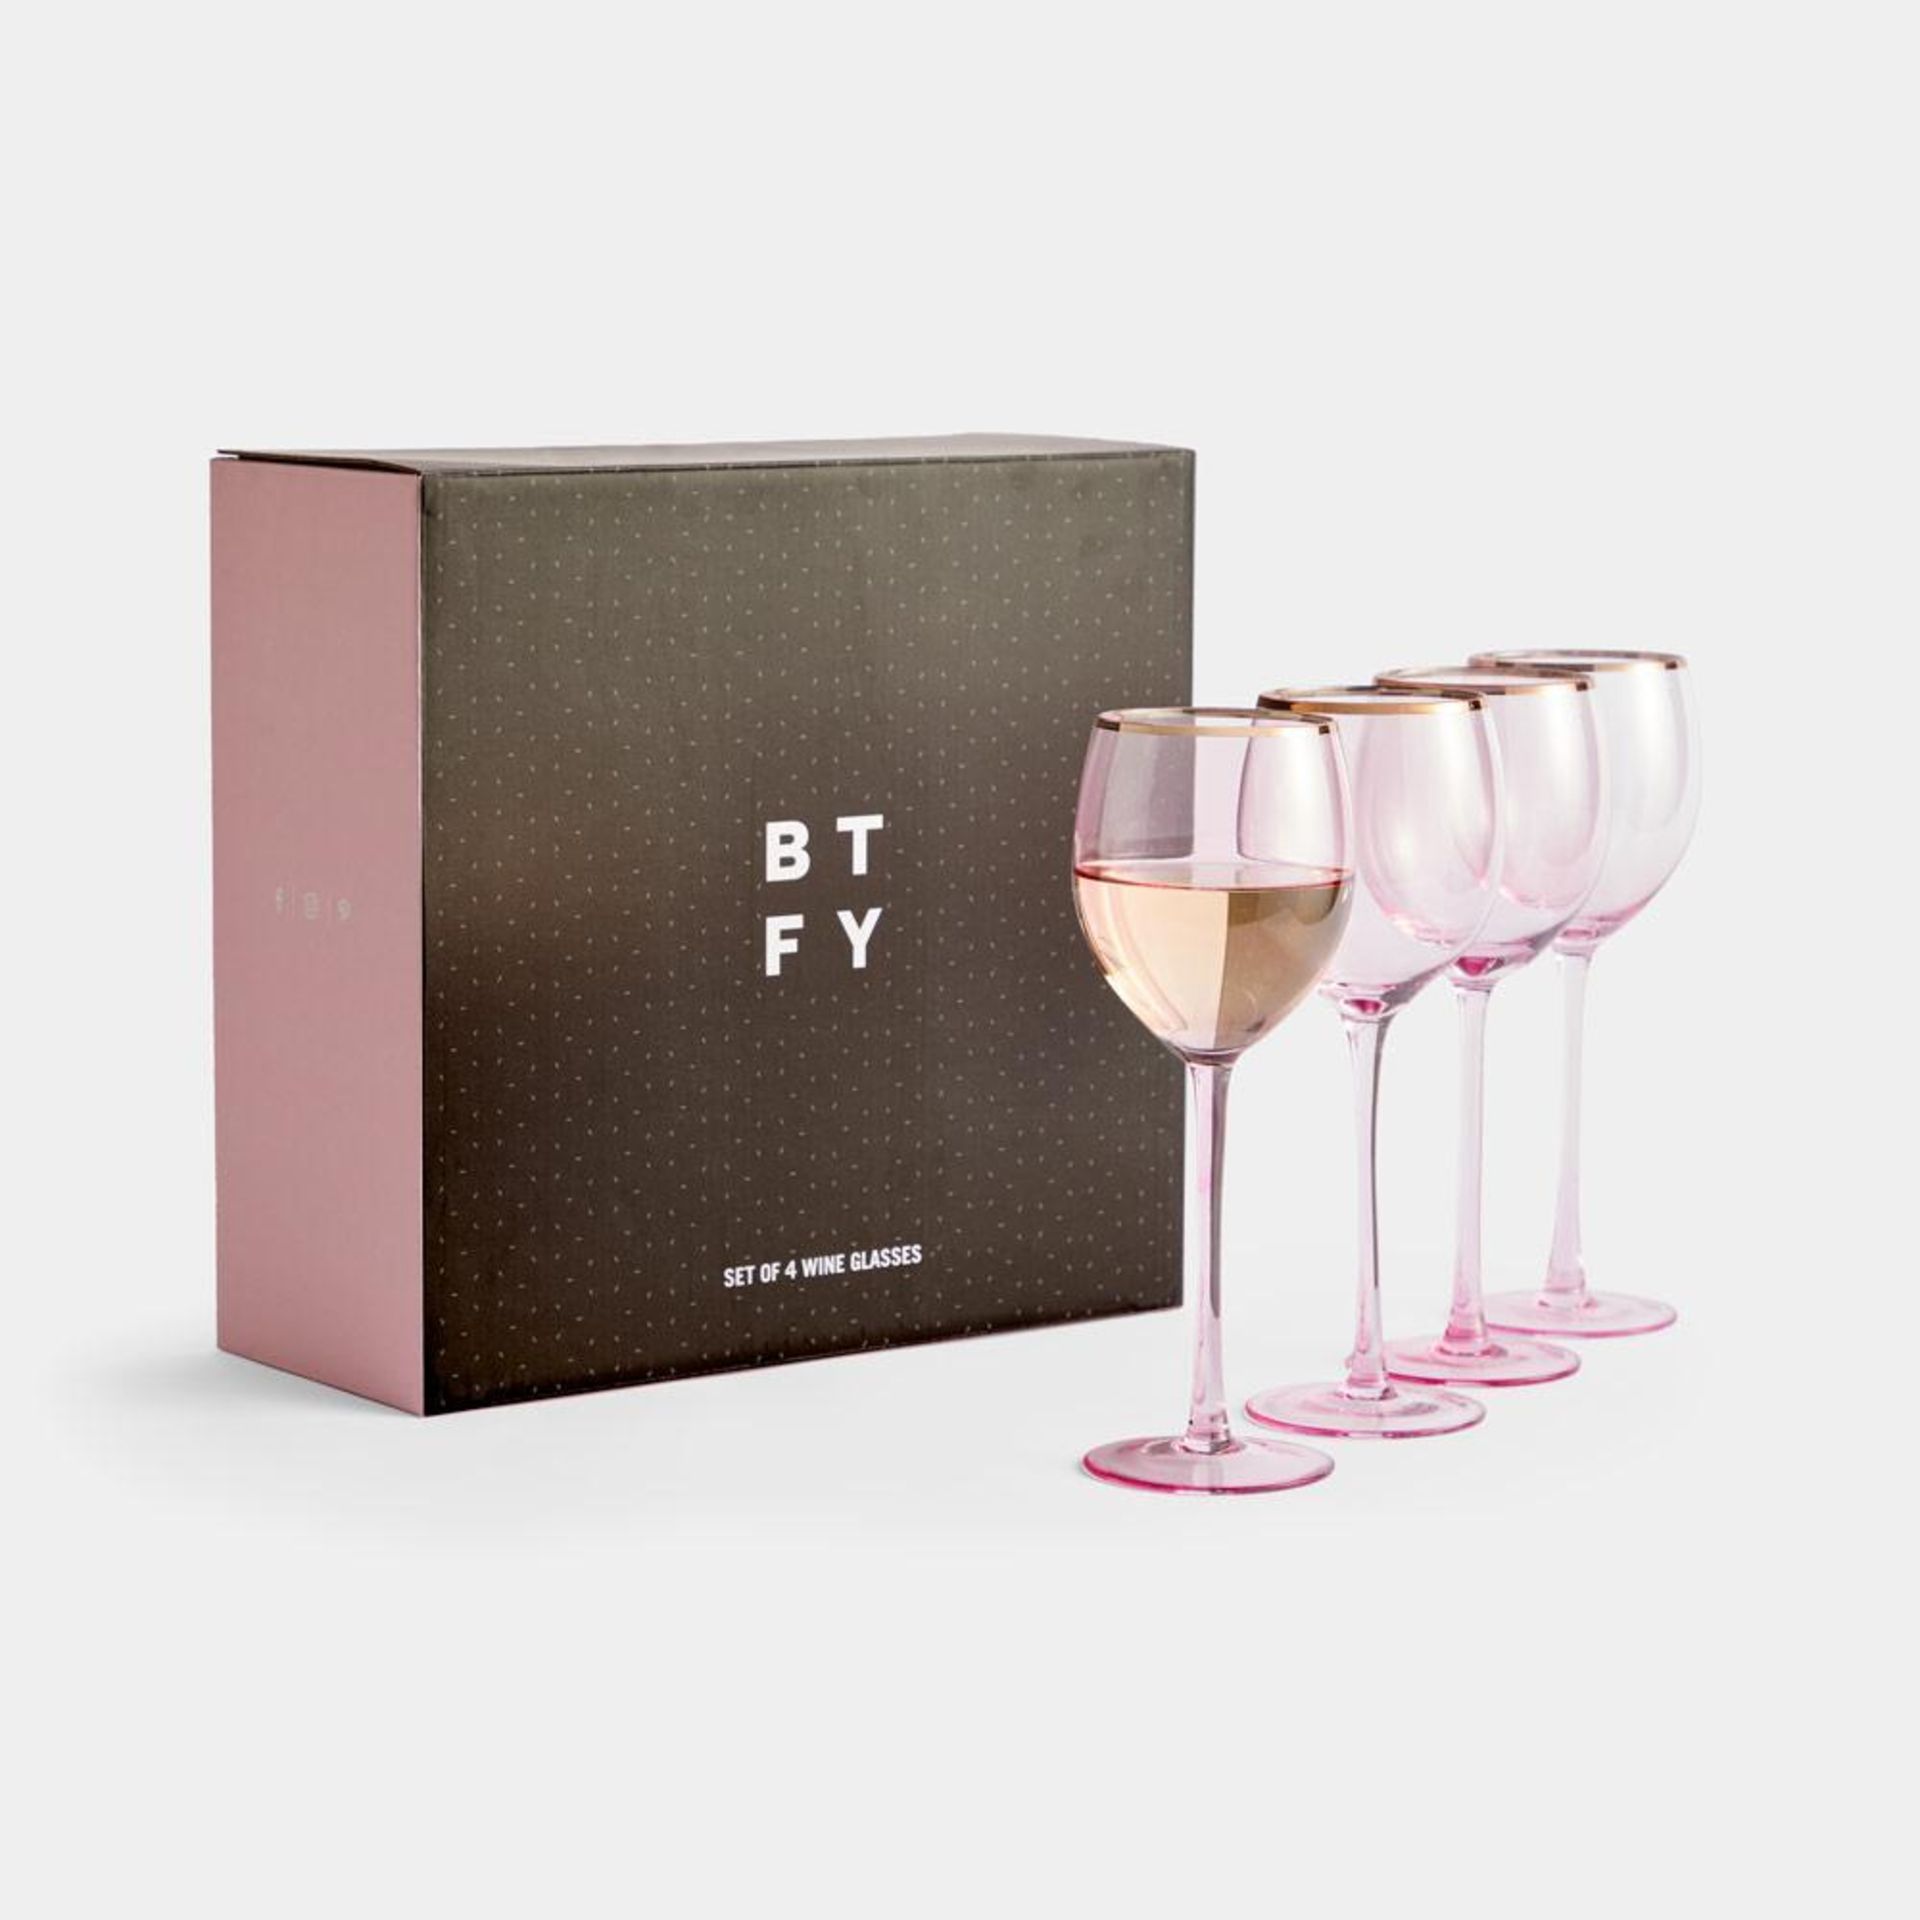 Set 4 Pink Wine Glasses - ER50. Set of 4 Pink Wine GlassesWhether its red, white or rosÃ© youâ€™re